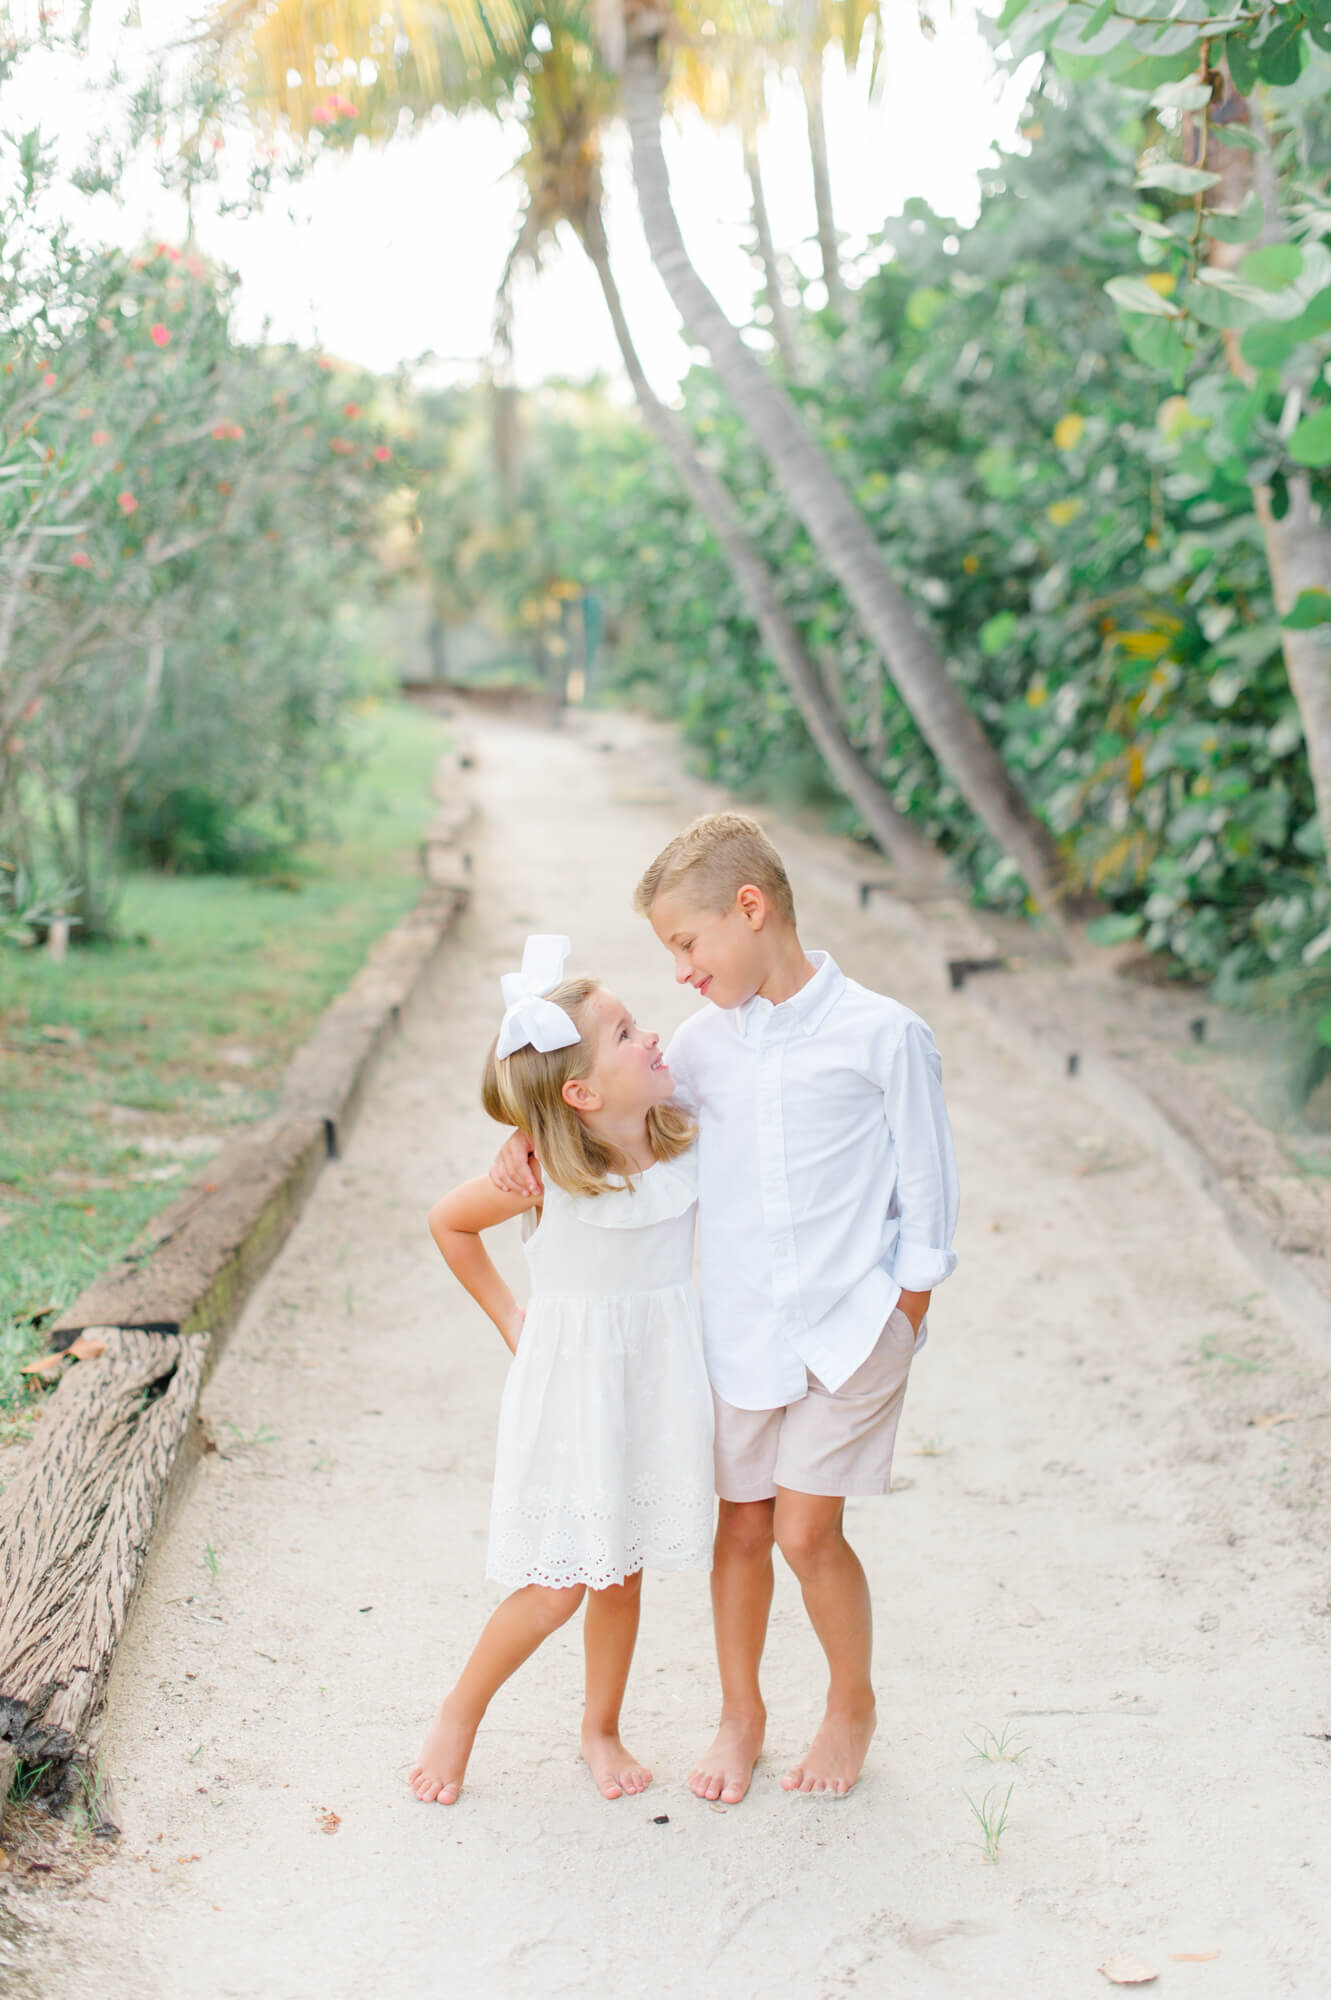 Sweet siblings smiling at each other on the beach path with beautiful greenery and palm trees all around